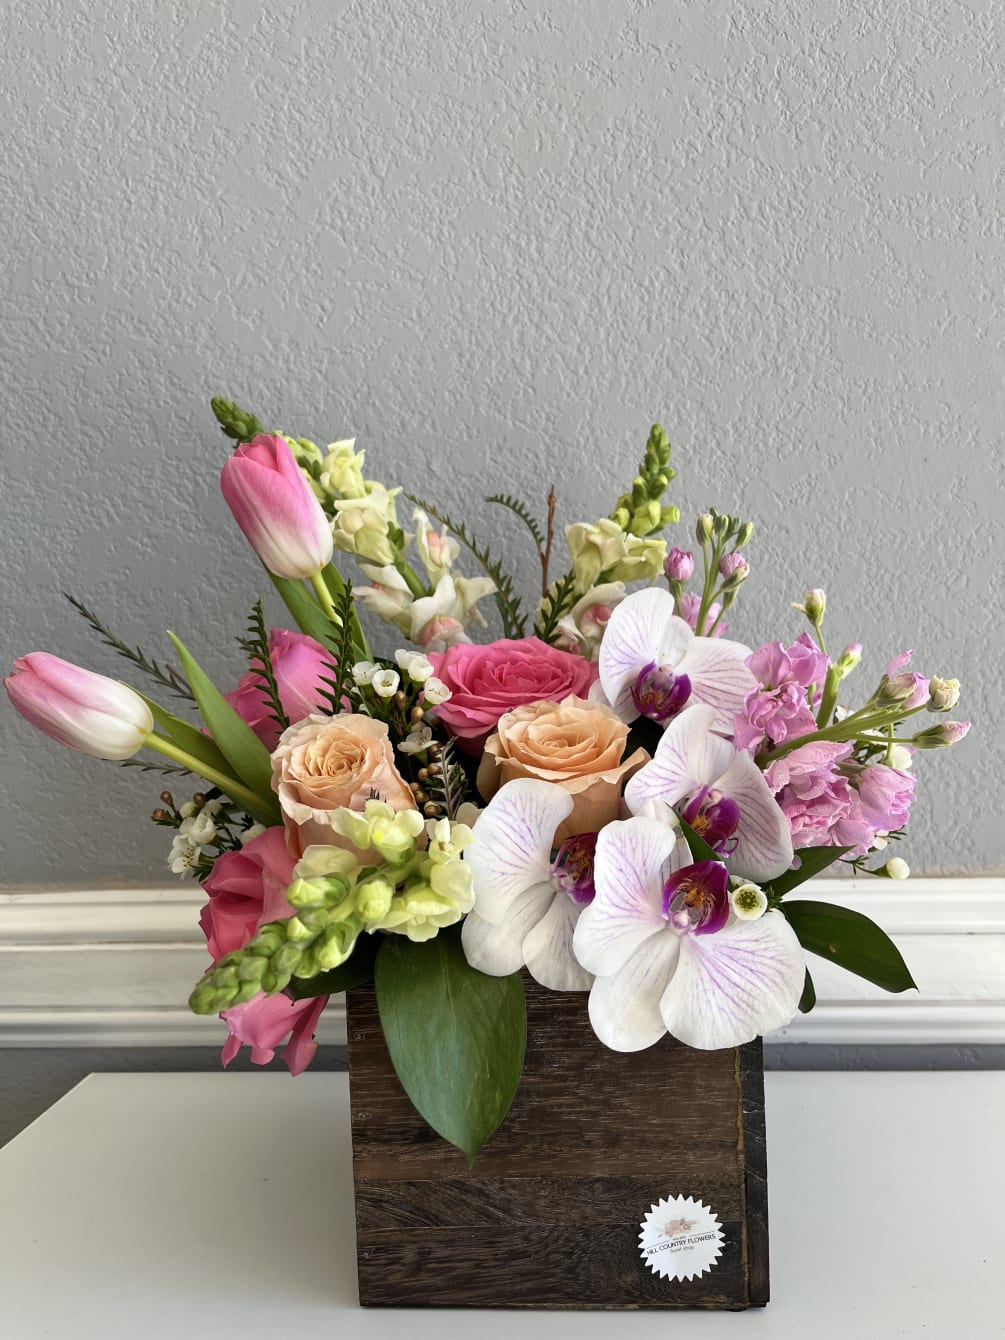 colorful arrangement for any occasion.